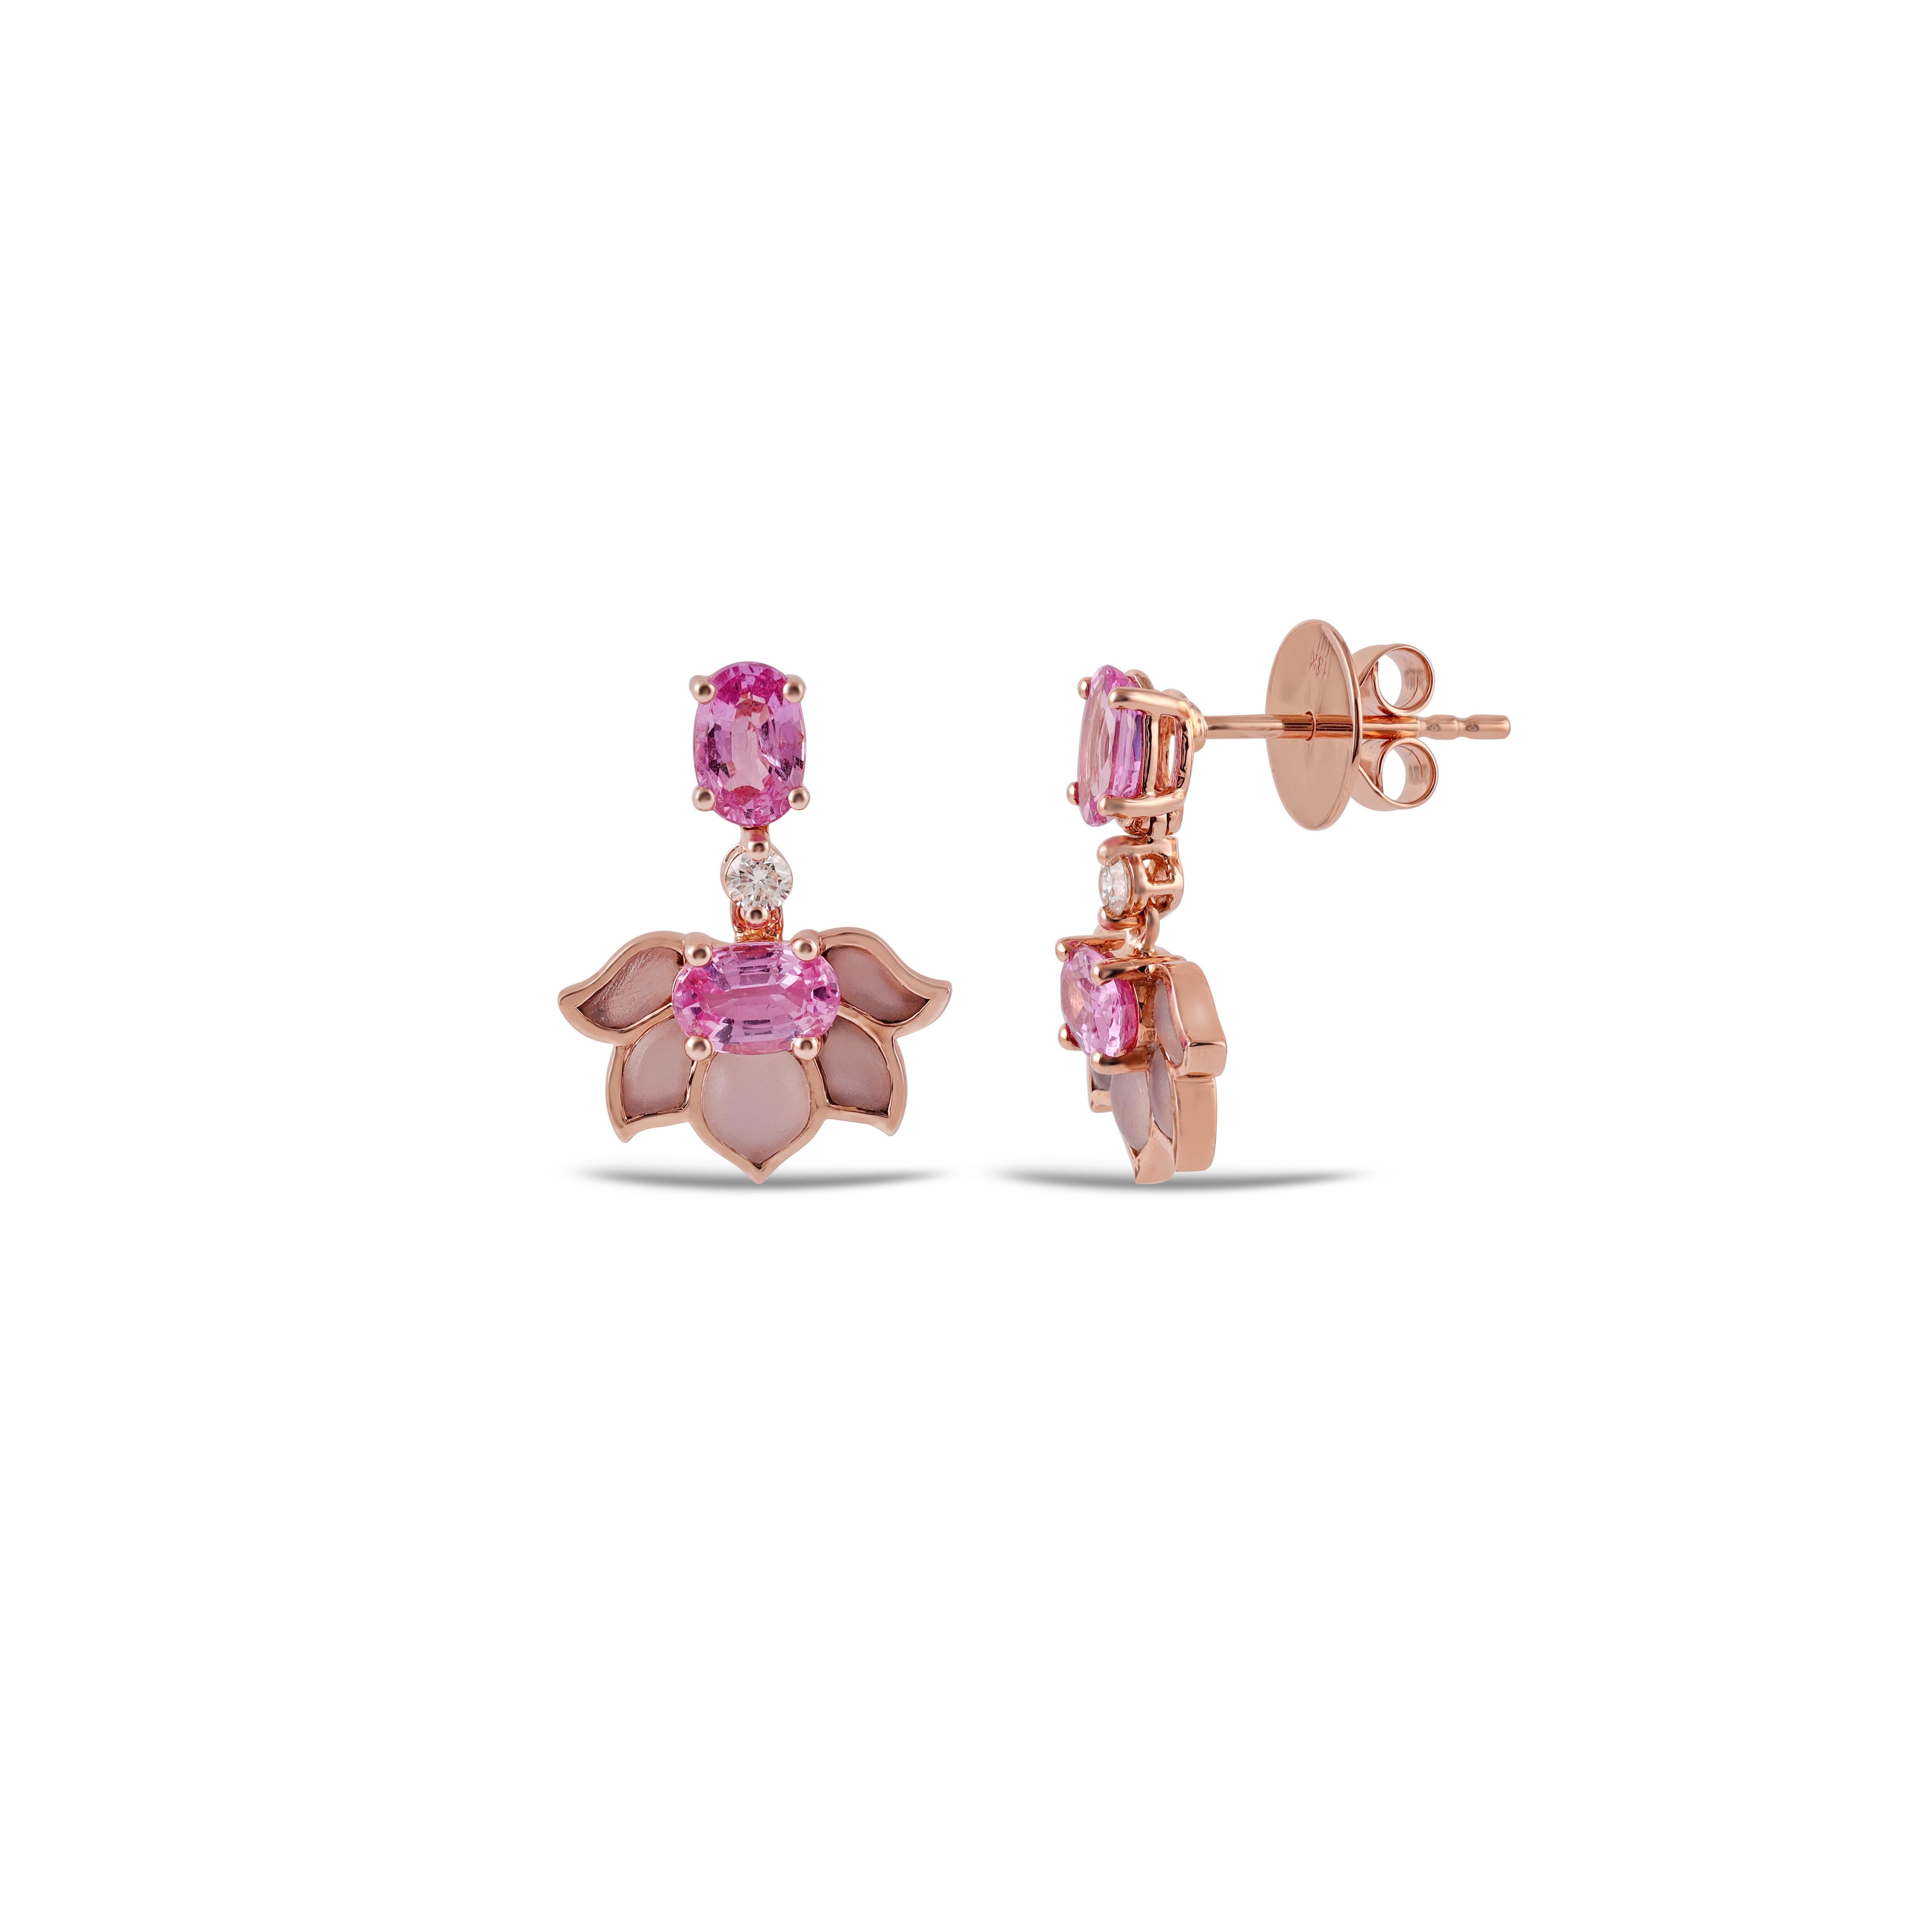 Contemporary 2.42 cts Pink Sapphire, Rose quartz & Round Diamonds Earrings in 18k Rose Gold For Sale